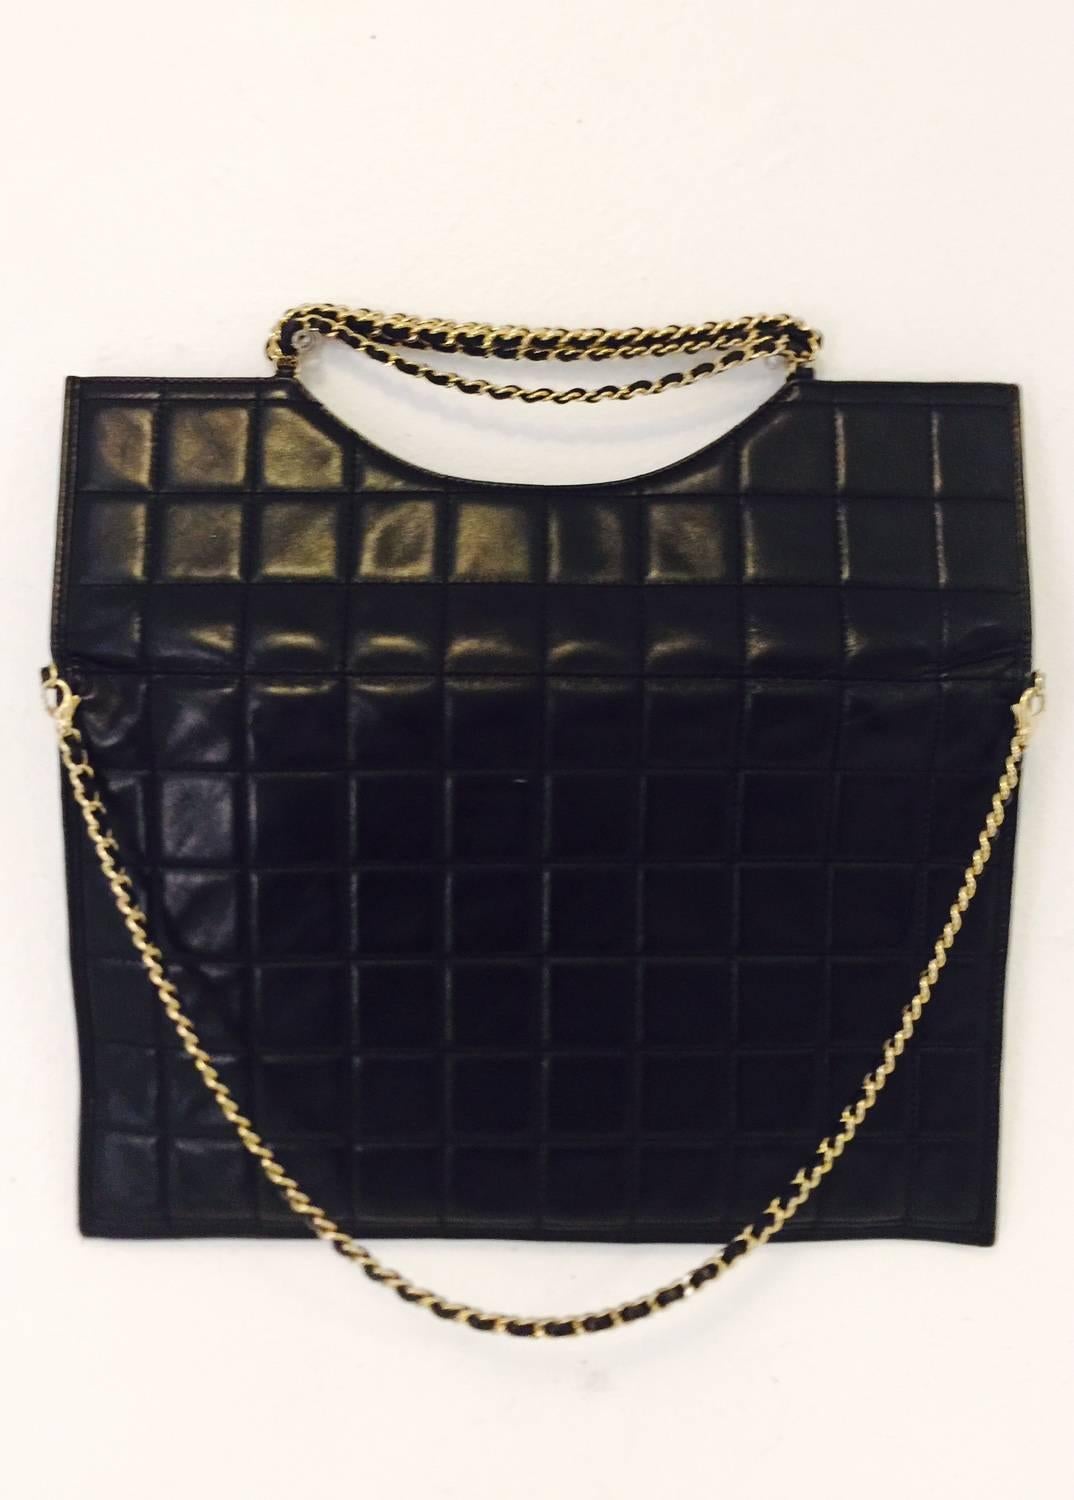 Chanel box quilted bag was crafted in 2002-2003, this coveted Chanel bag is sure to please the most discriminating connoisseur!  Features supple box quilted lambskin allover and classic 